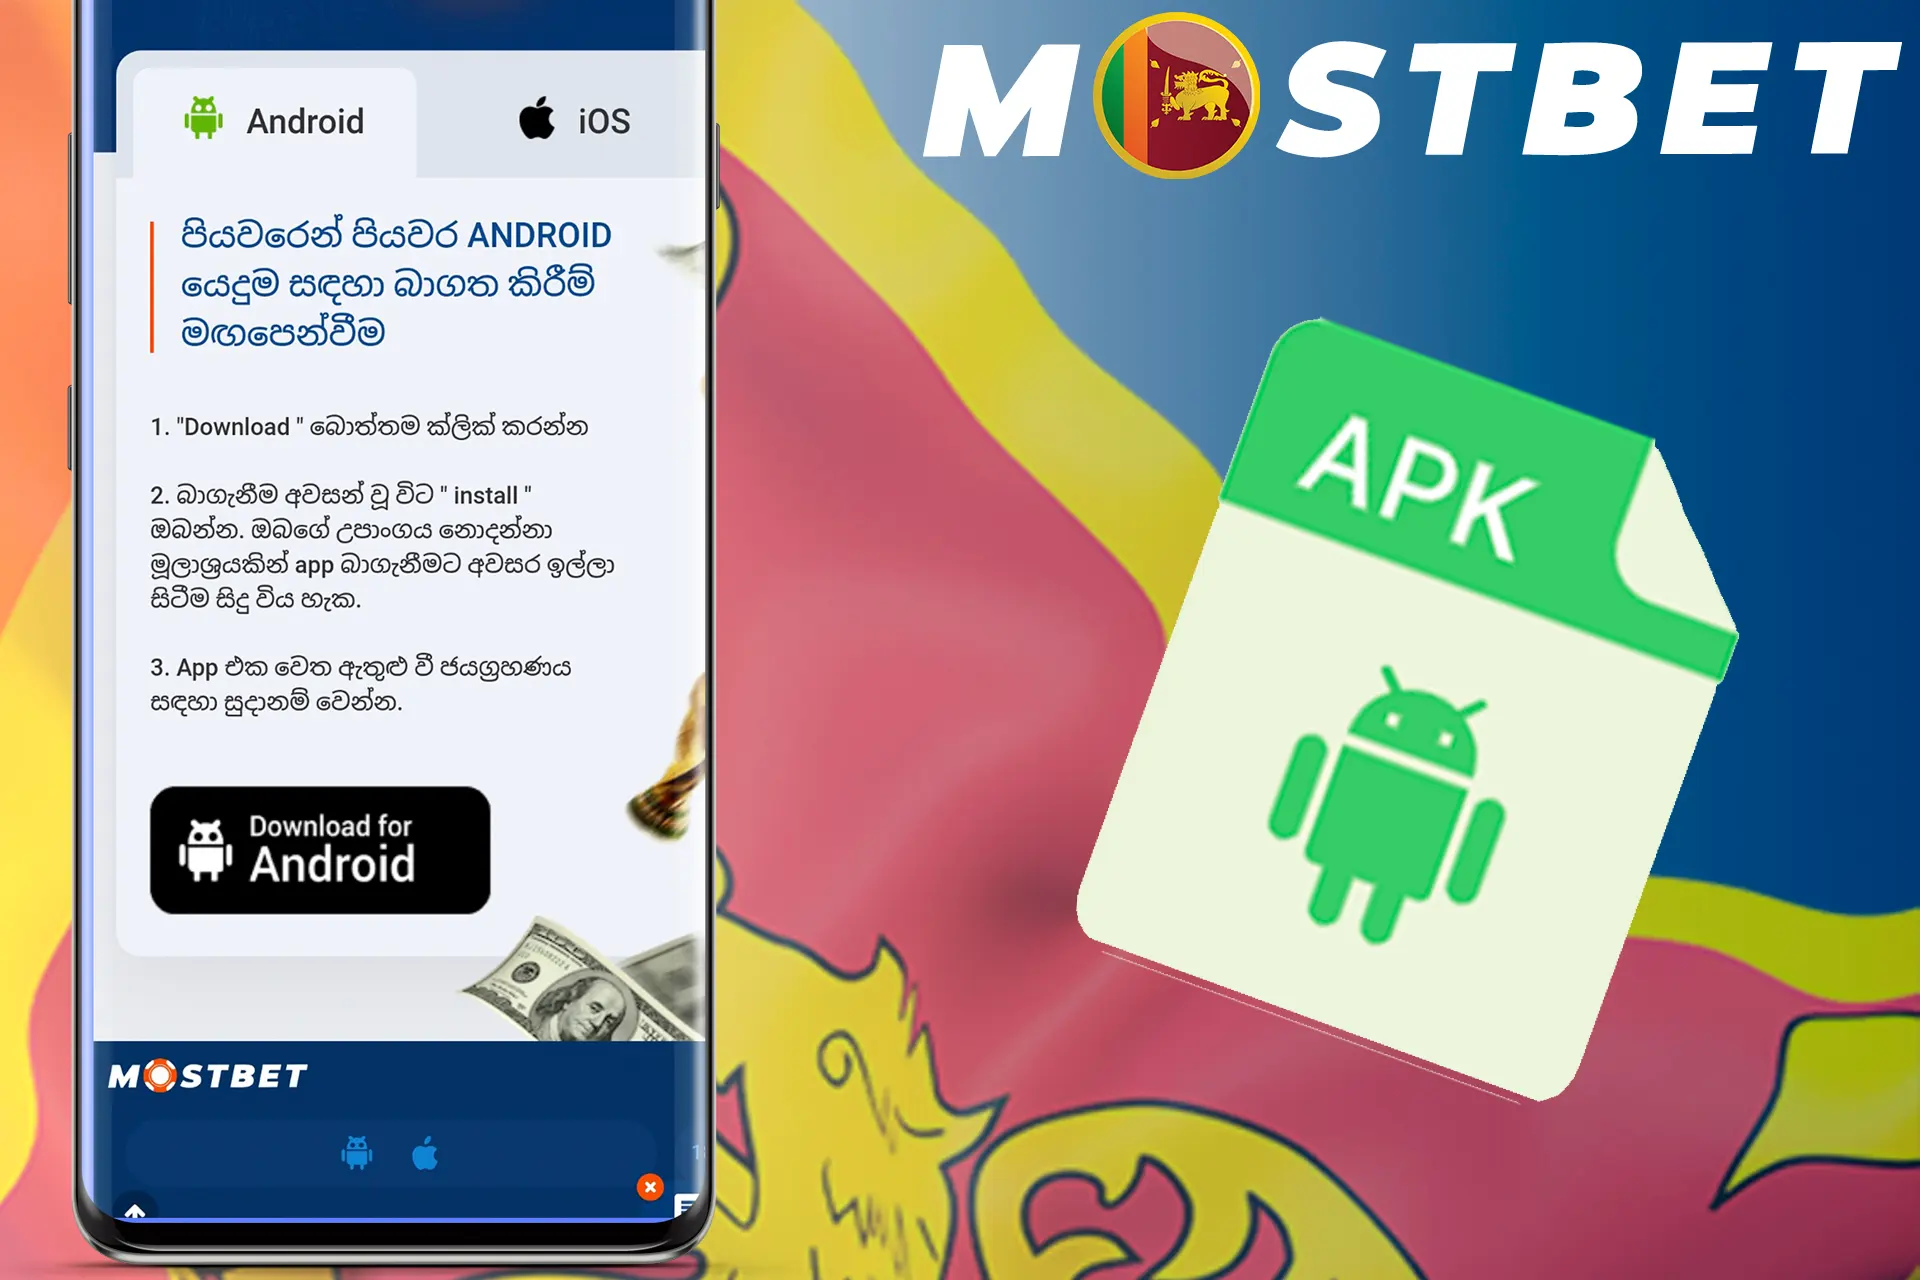 Install the mobile application from Mostbet Sri Lanka on Android